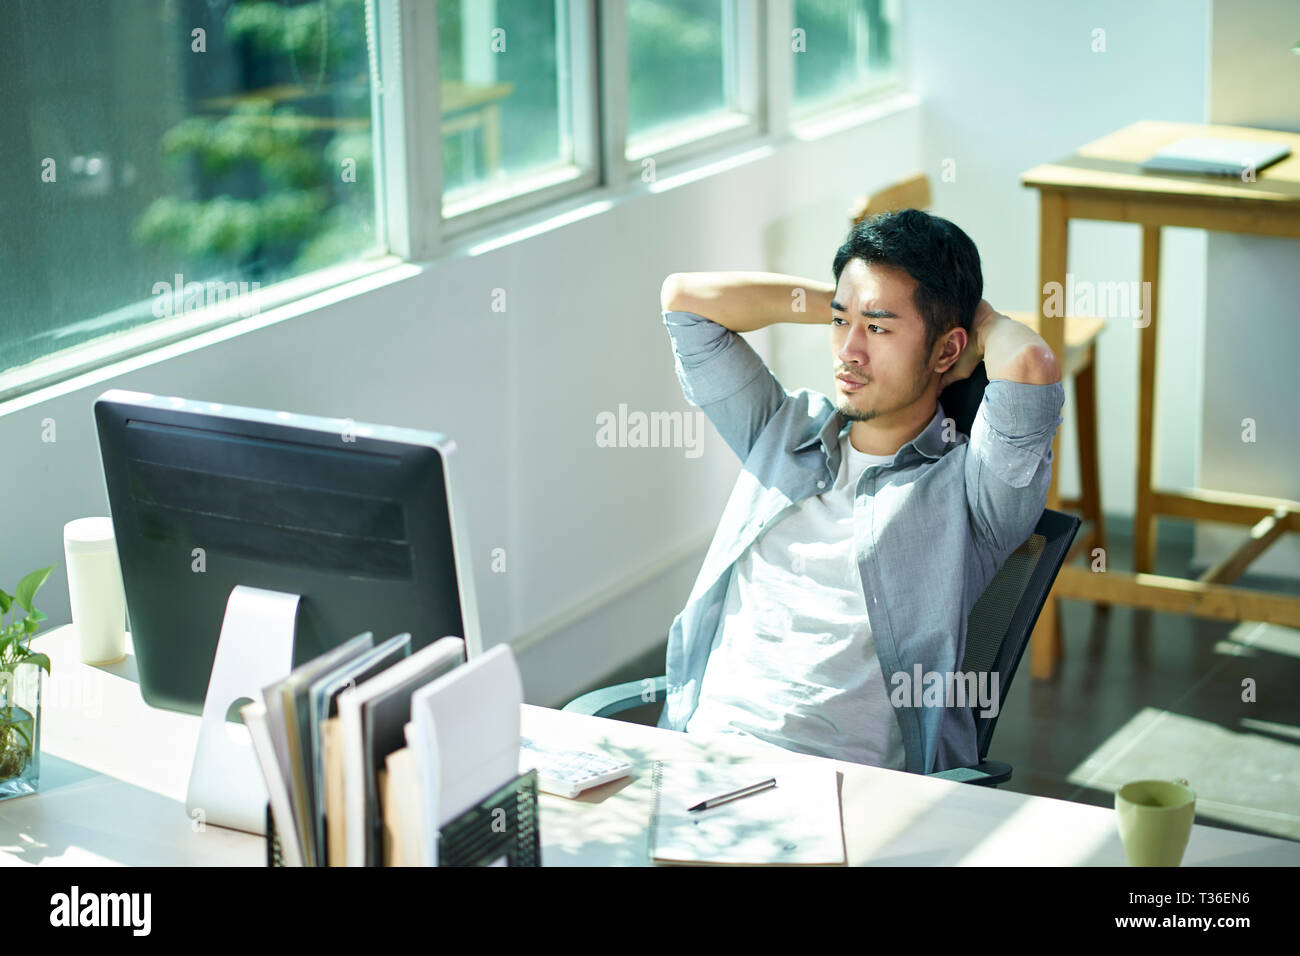 young asian business man entrepreneur contemplating in office, hands behind head frowning. Stock Photo